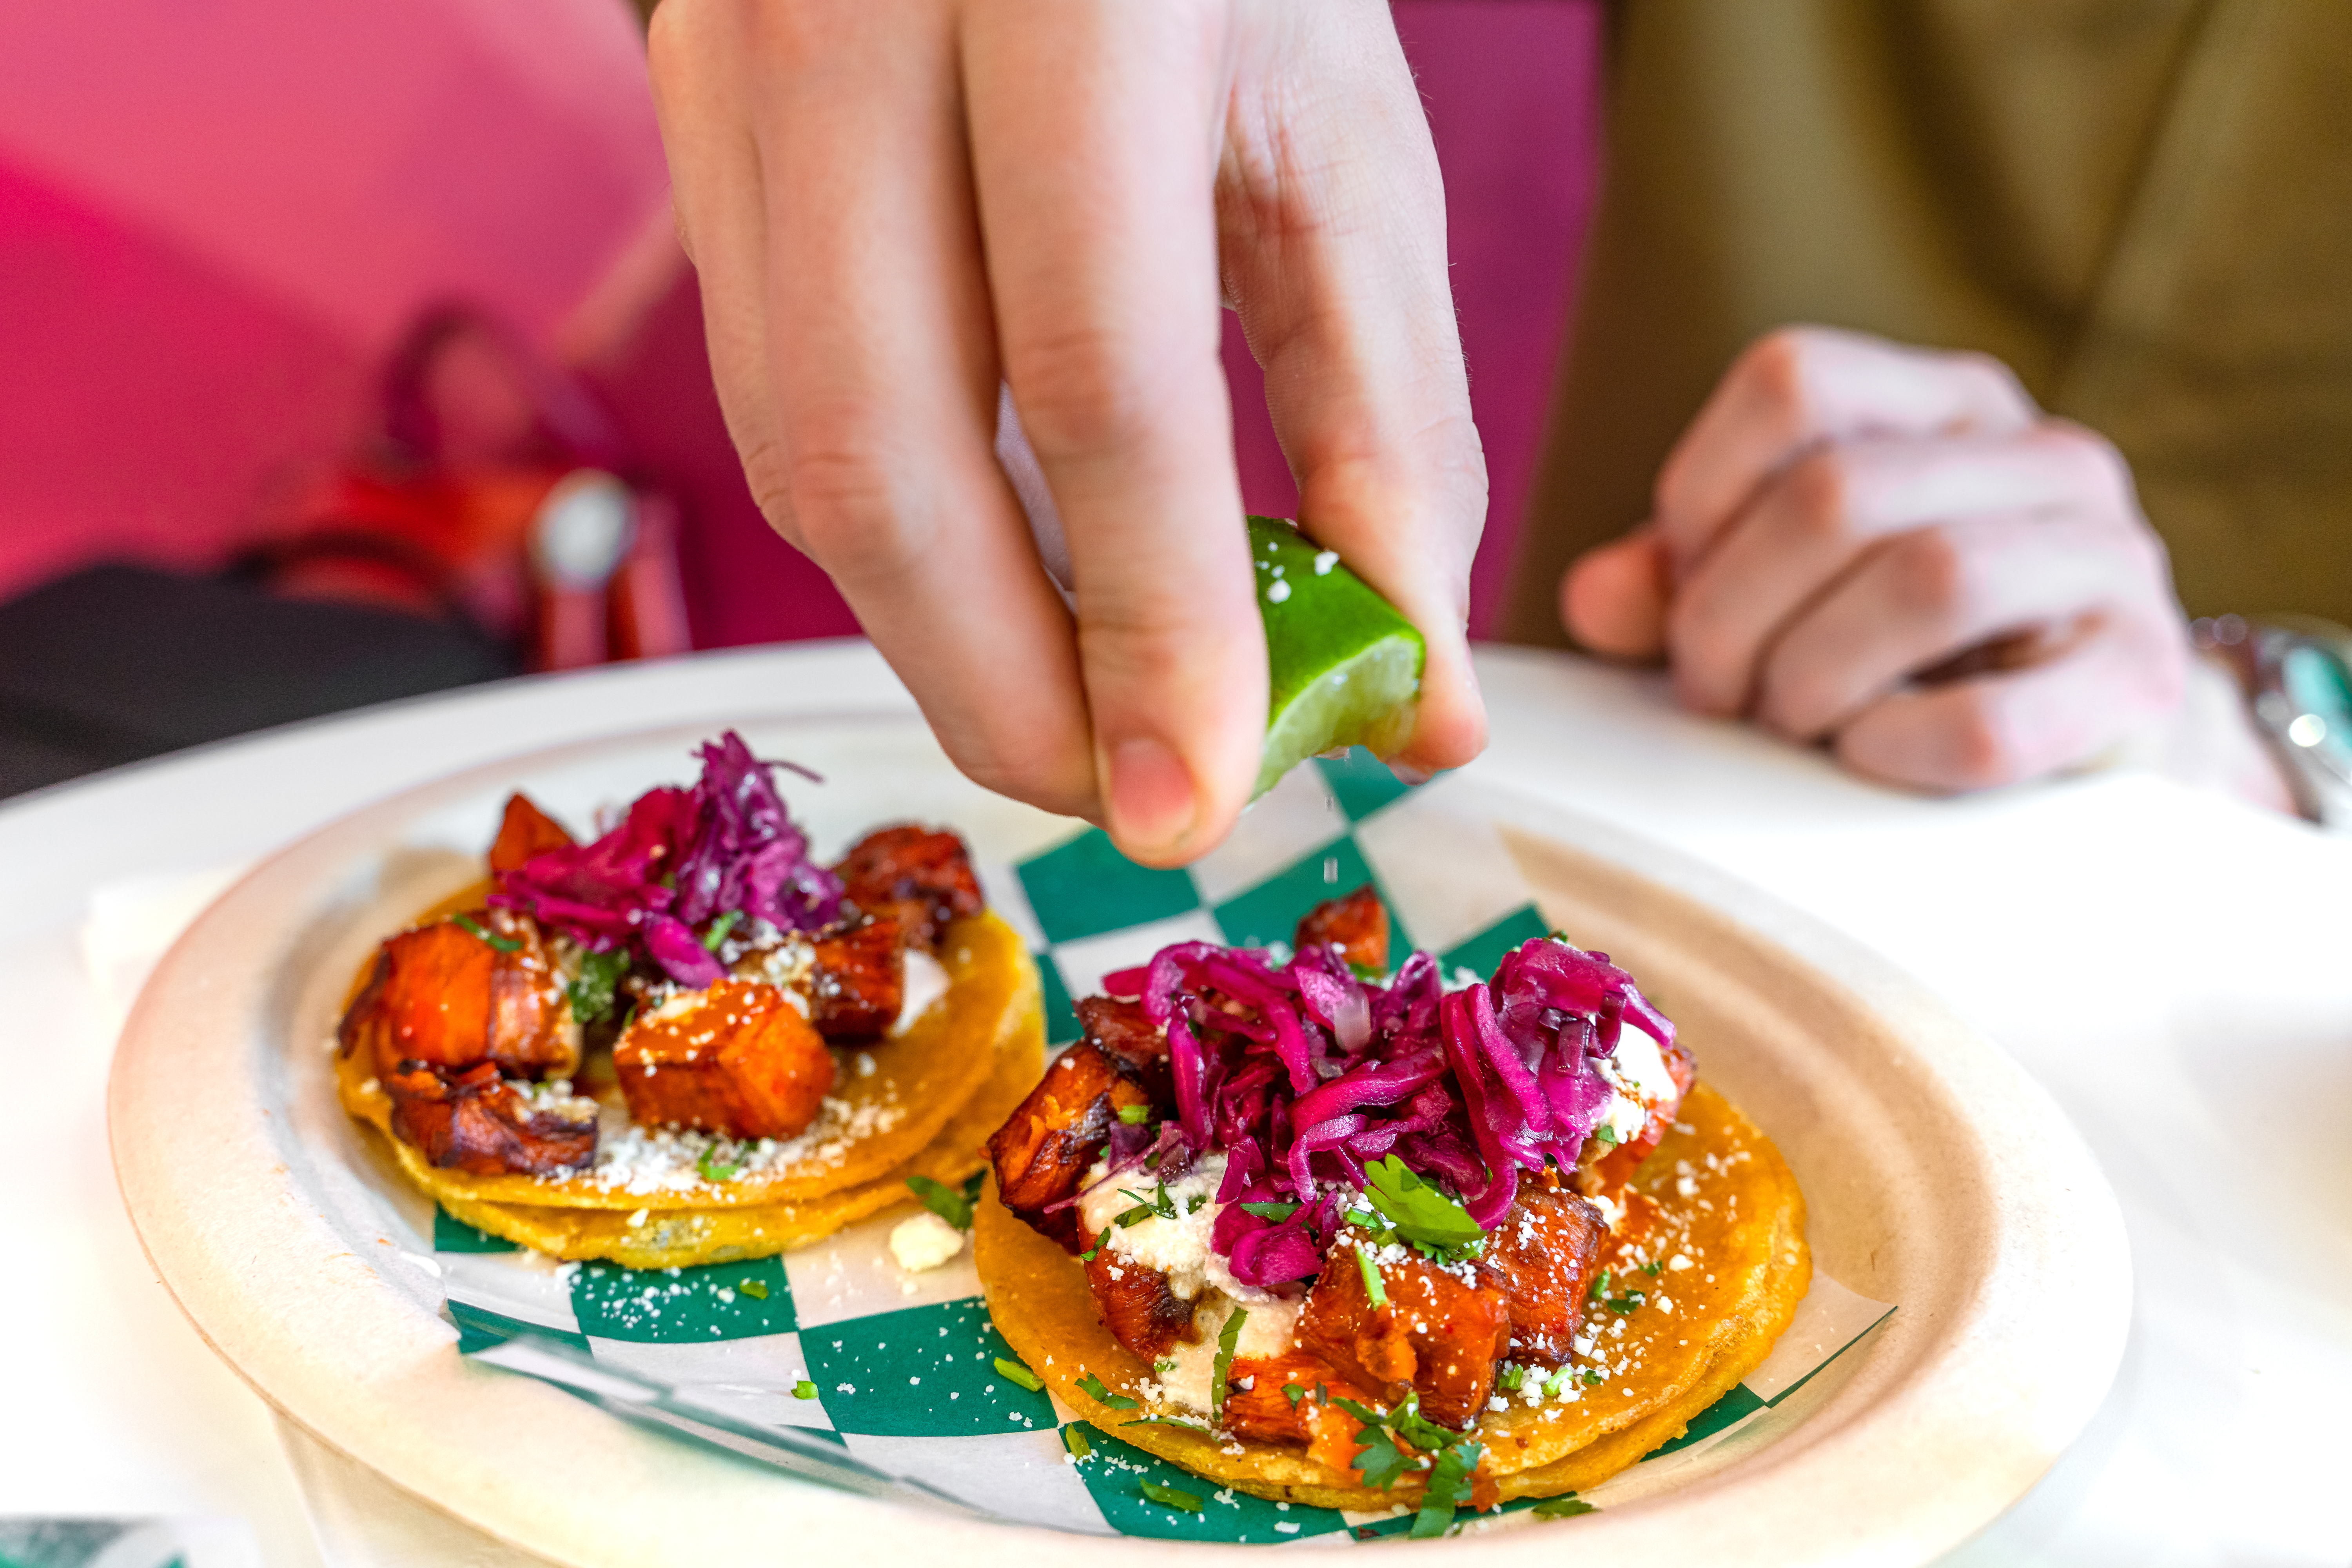 A hand squeezes a lime into a plate of two sweet potato tacos.